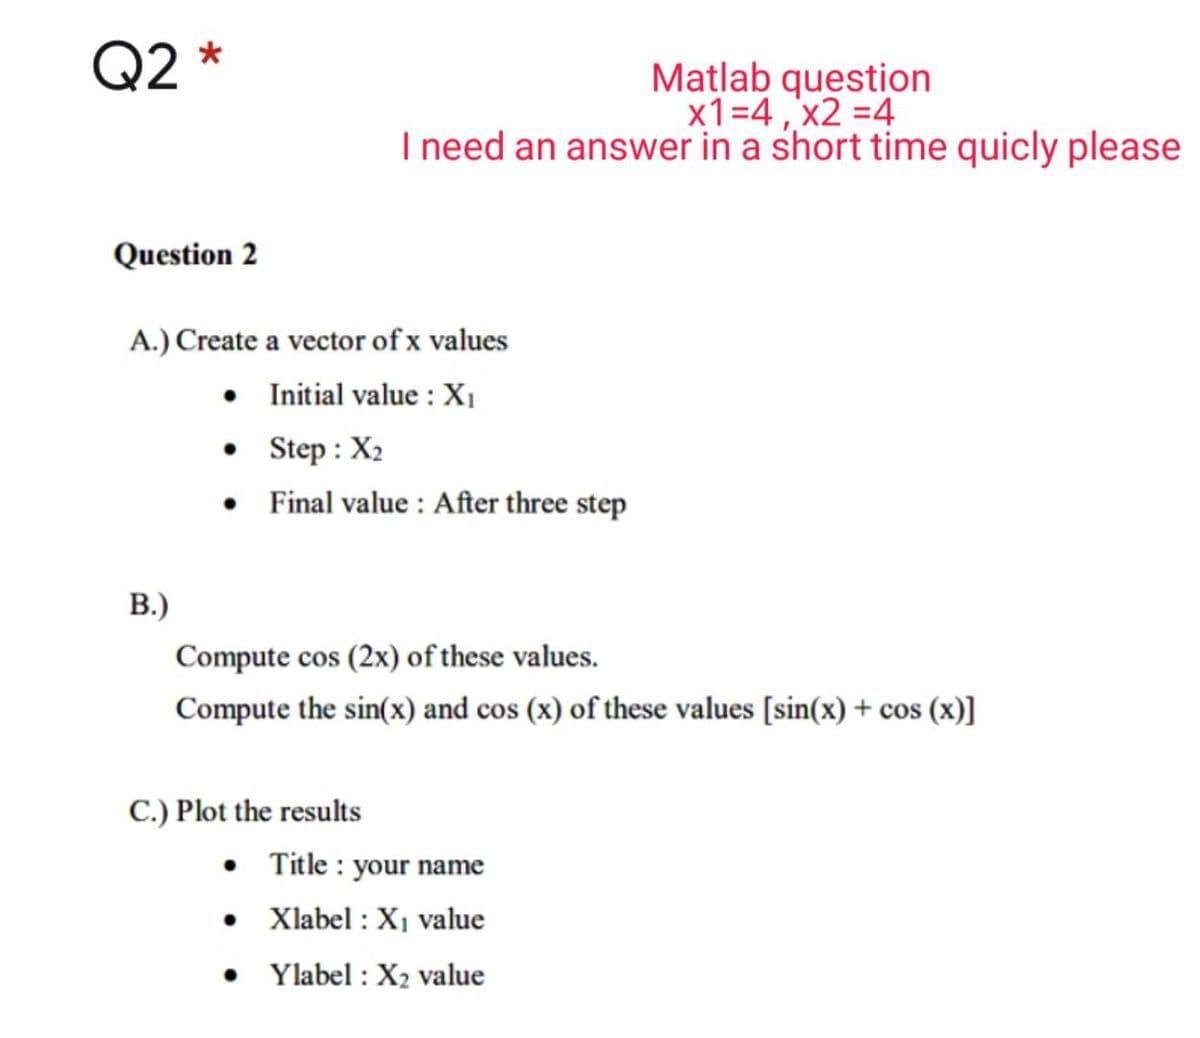 Q2 *
Matlab question
x1=4,'x2 =4
I need an answer in a short time quicly please
Question 2
A.) Create a vector of x values
• Initial value : X,
• Step : X2
• Final value : After three step
B.)
Compute cos (2x) of these values.
Compute the sin(x) and cos (x) of these values [sin(x) + cos (x)]
C.) Plot the results
• Title : your name
• Xlabel : X1 value
Ylabel : X2 value
